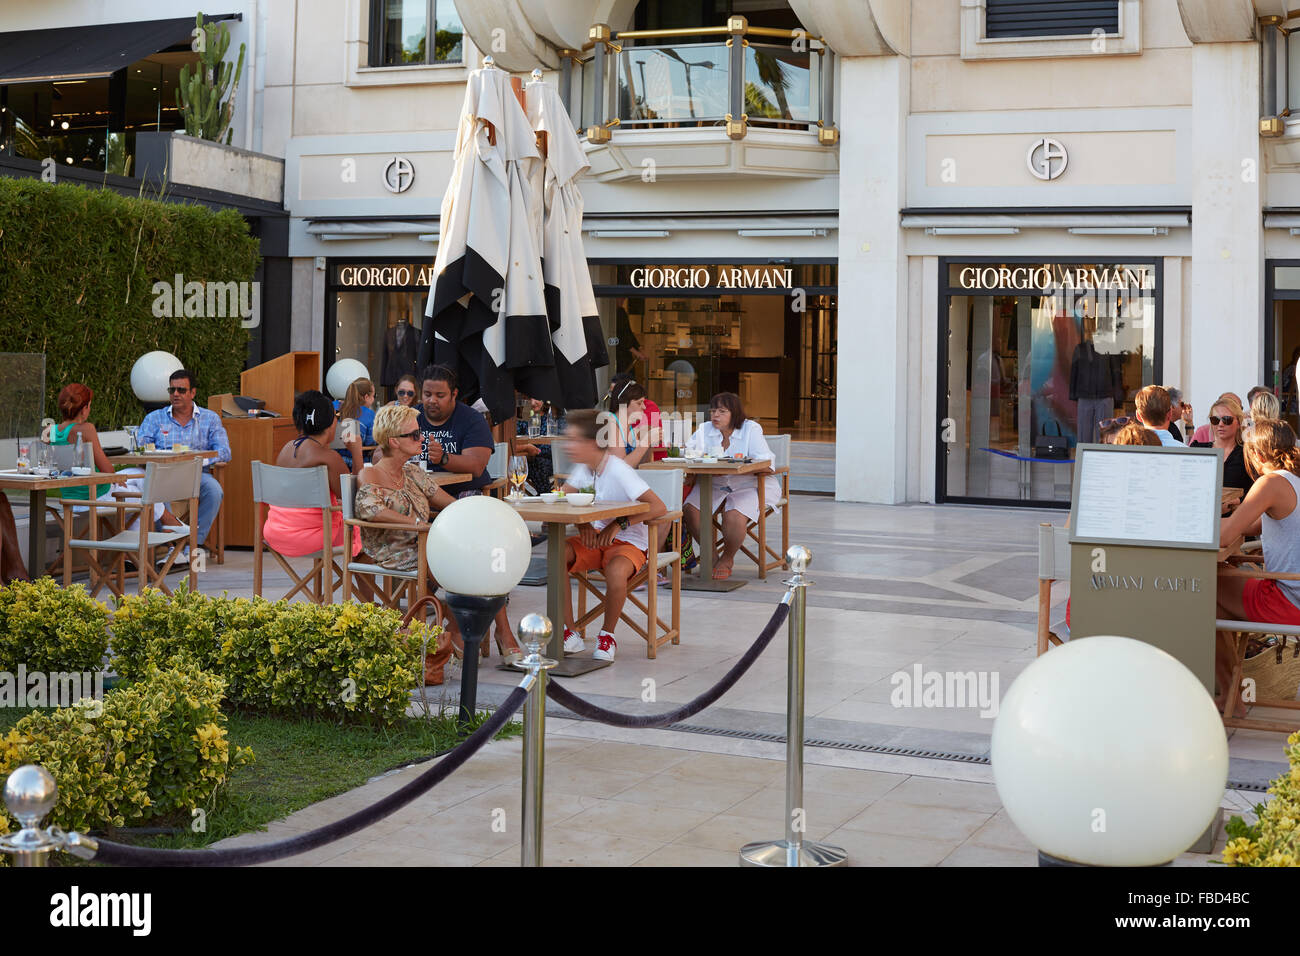 Giorgio Armani cafe with people in a calm summer afternoon in Cannes, France Stock Photo